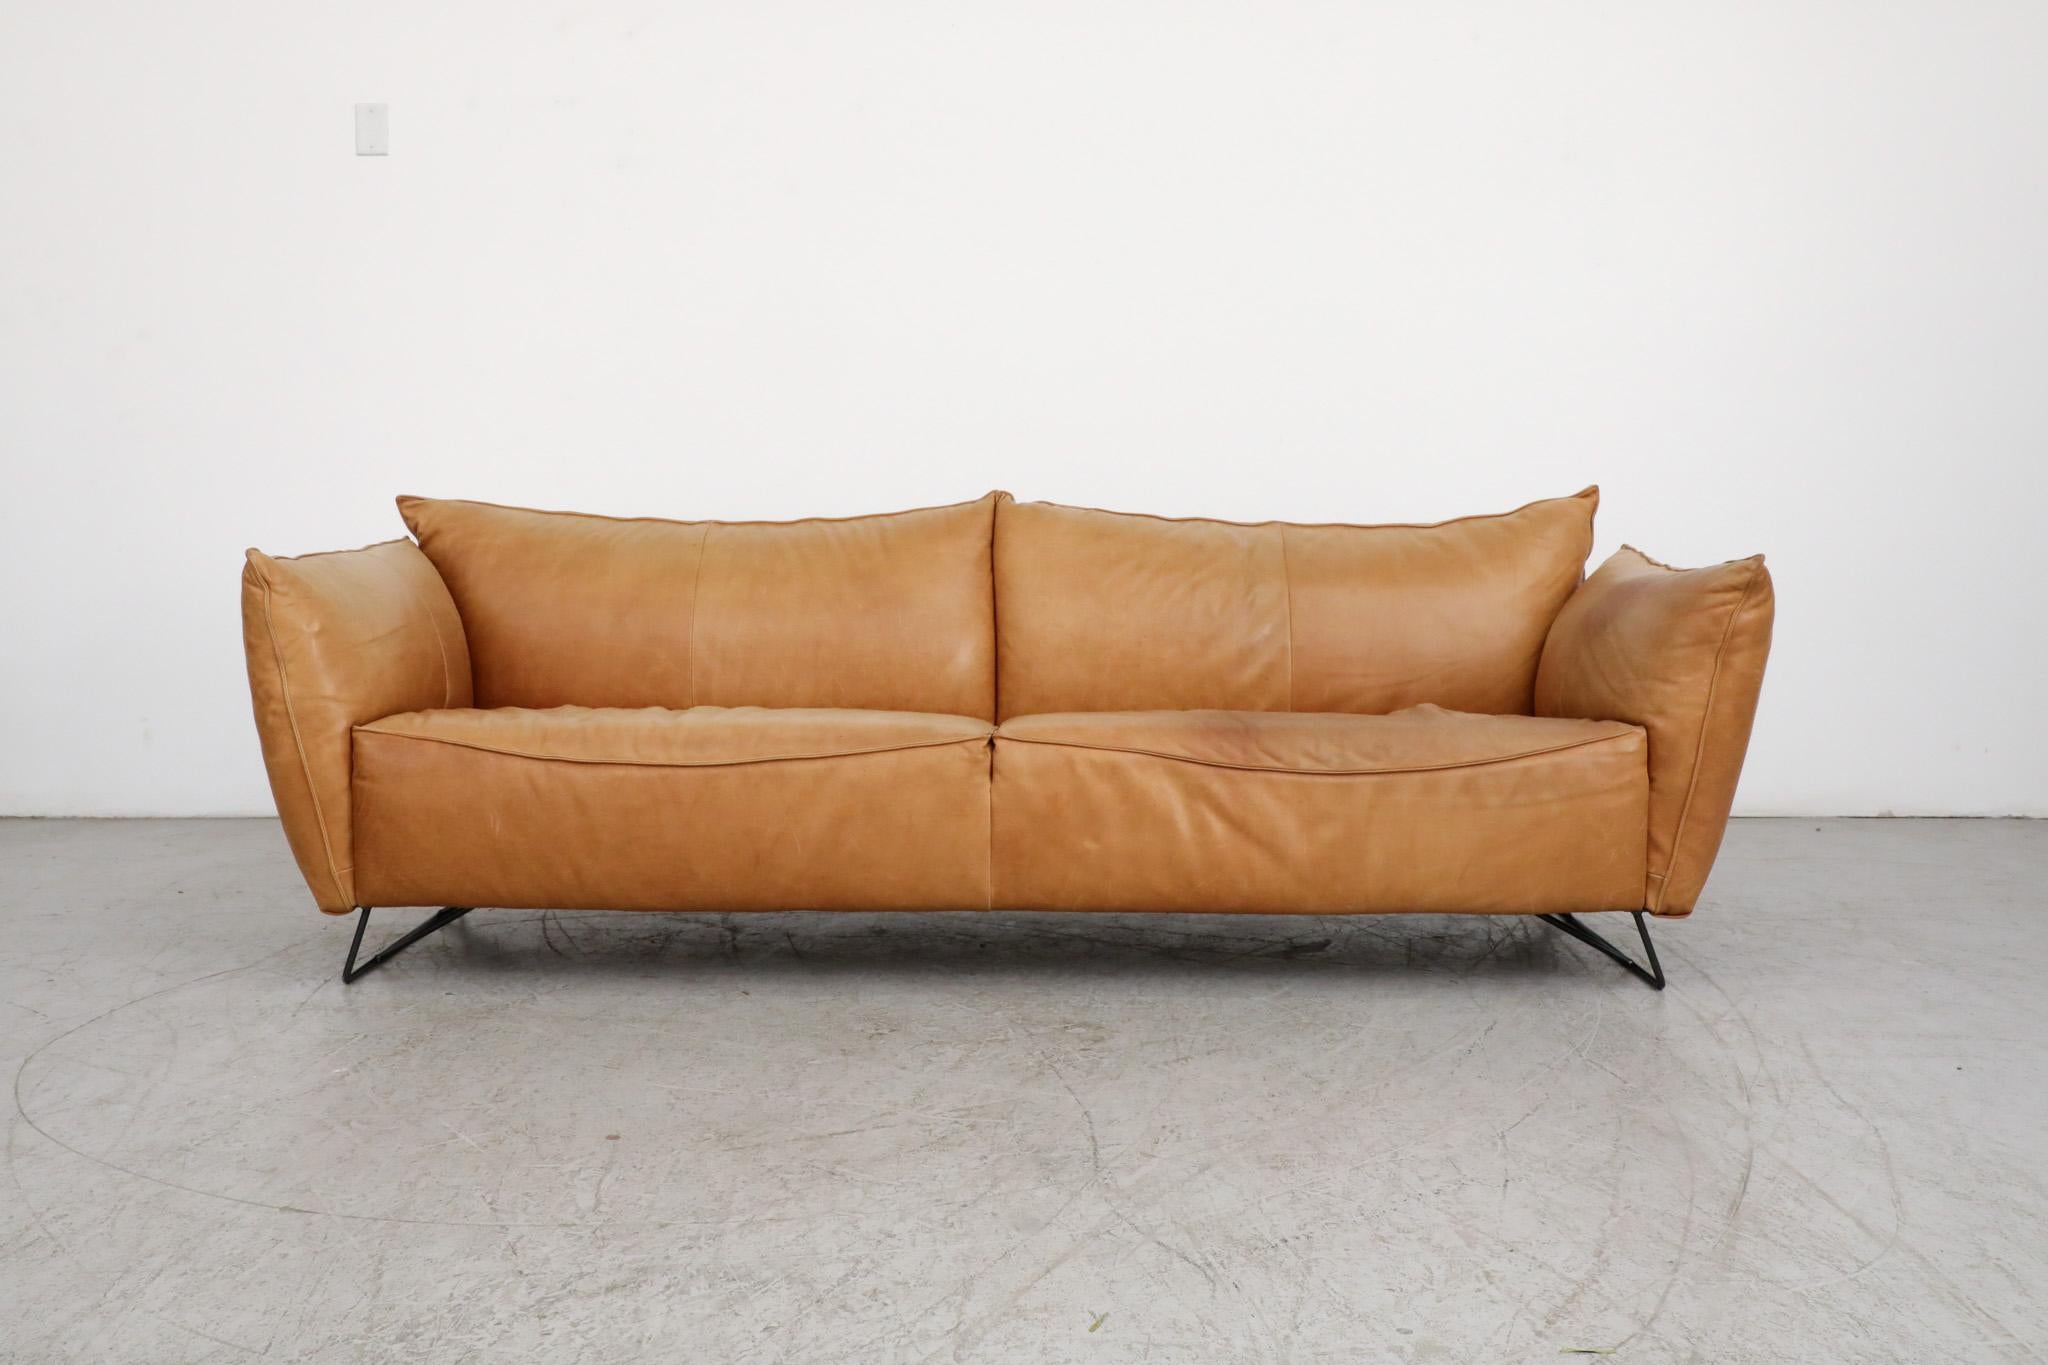 Beautiful Gerard Van Den Berg style butterscotch 3 seater sofa for Jess. Comfy and stylish leather sofa with attractive curves and mid-century flair. In impressive original condition with black enameled metal feet and some visible age appropriate